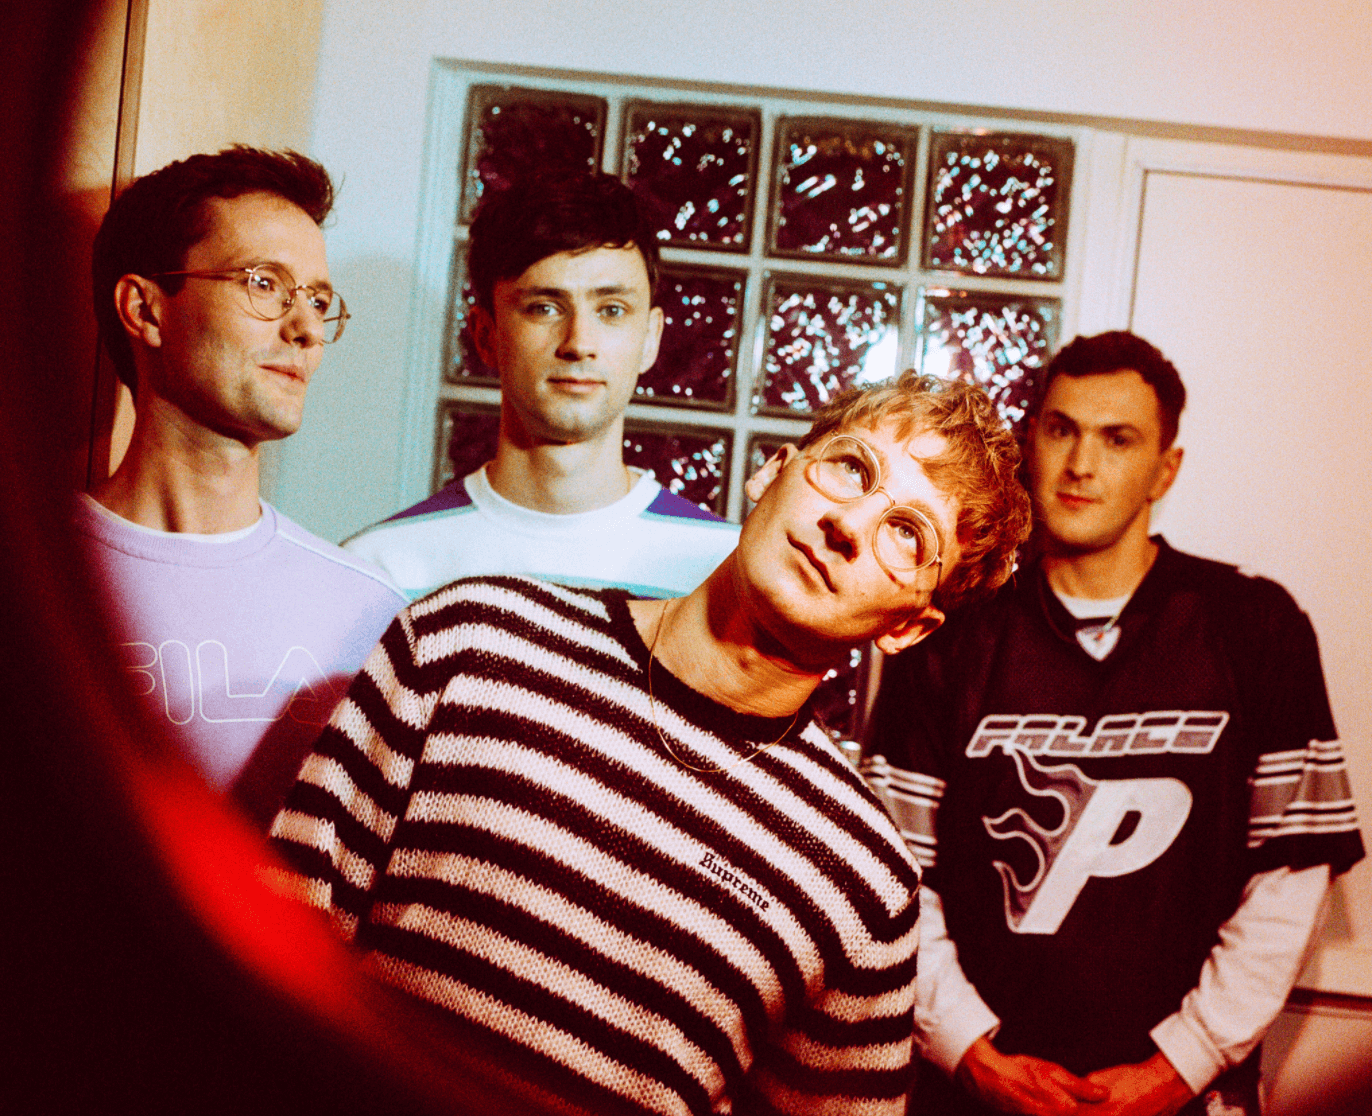 UK band Glass Animals, have shared a collaboration with Bree Runway on their single "Space Ghost Coast To Coast"